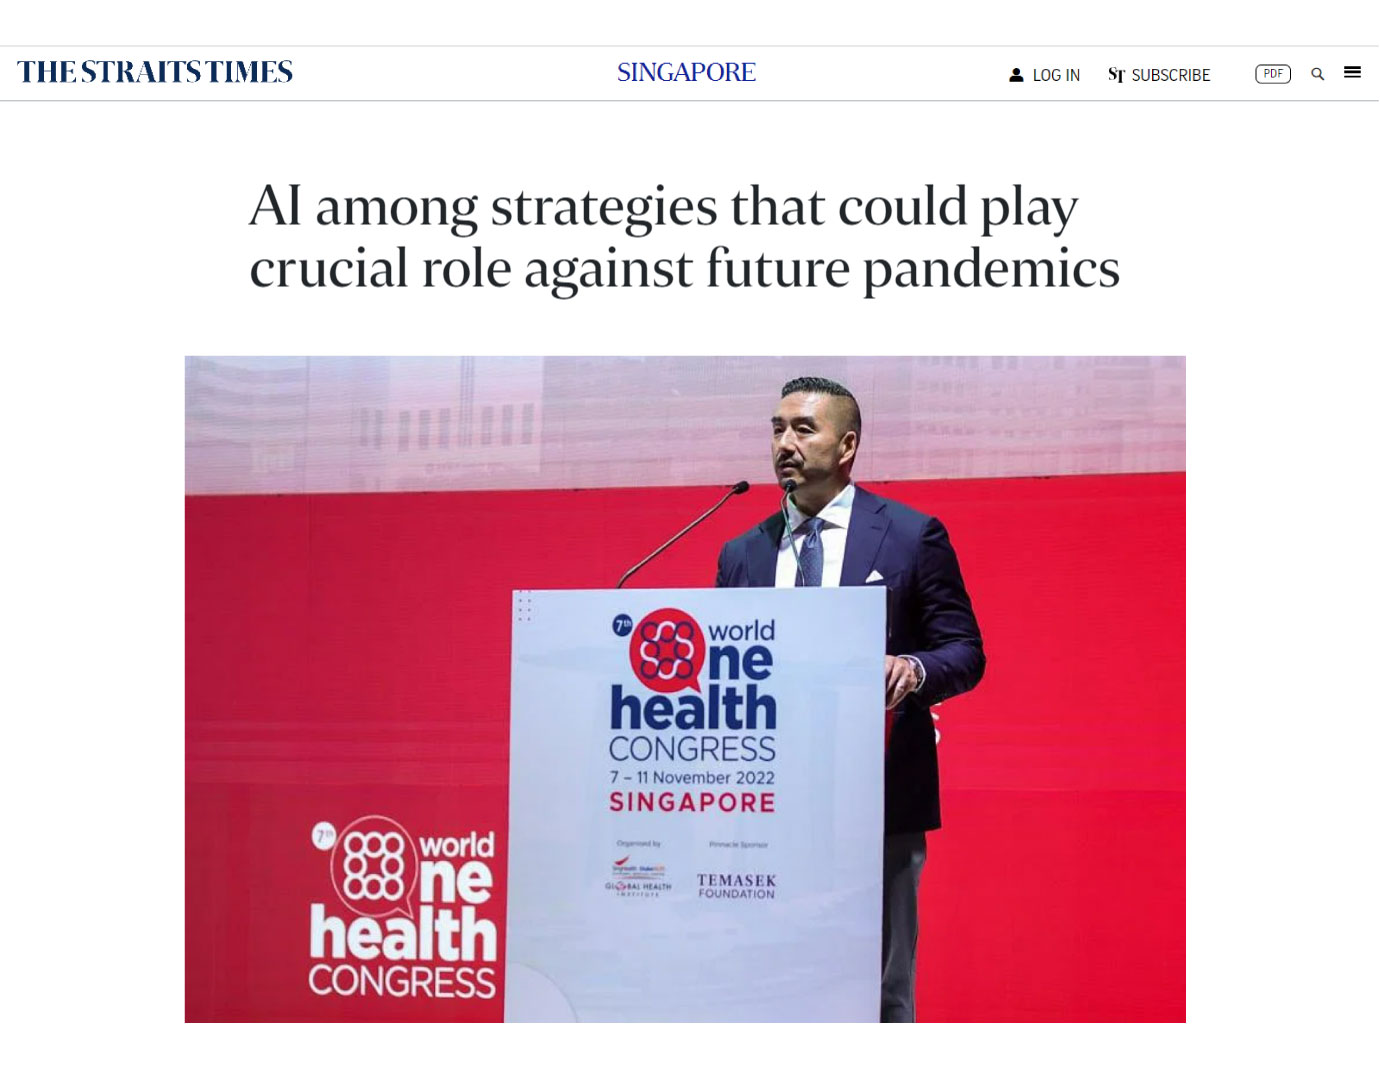 AI among strategies that could play crucial role against future pandemics